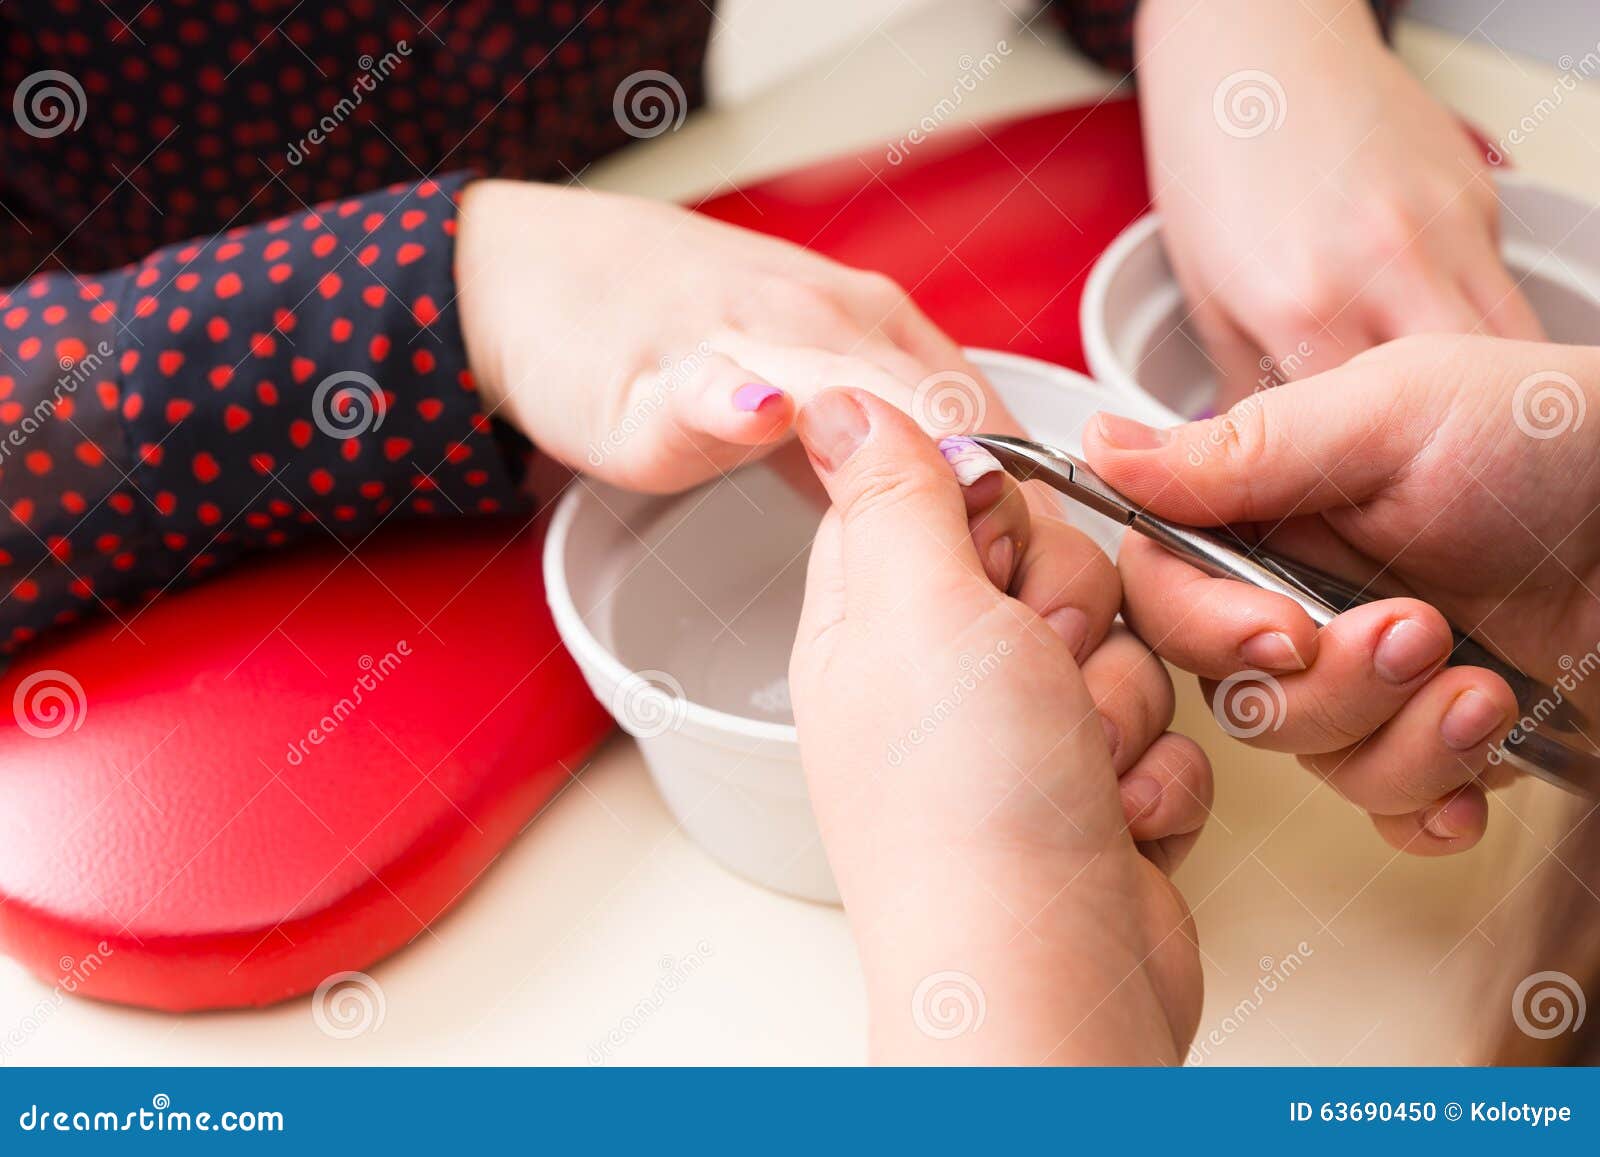 manicurist trimming cuticles on client hands